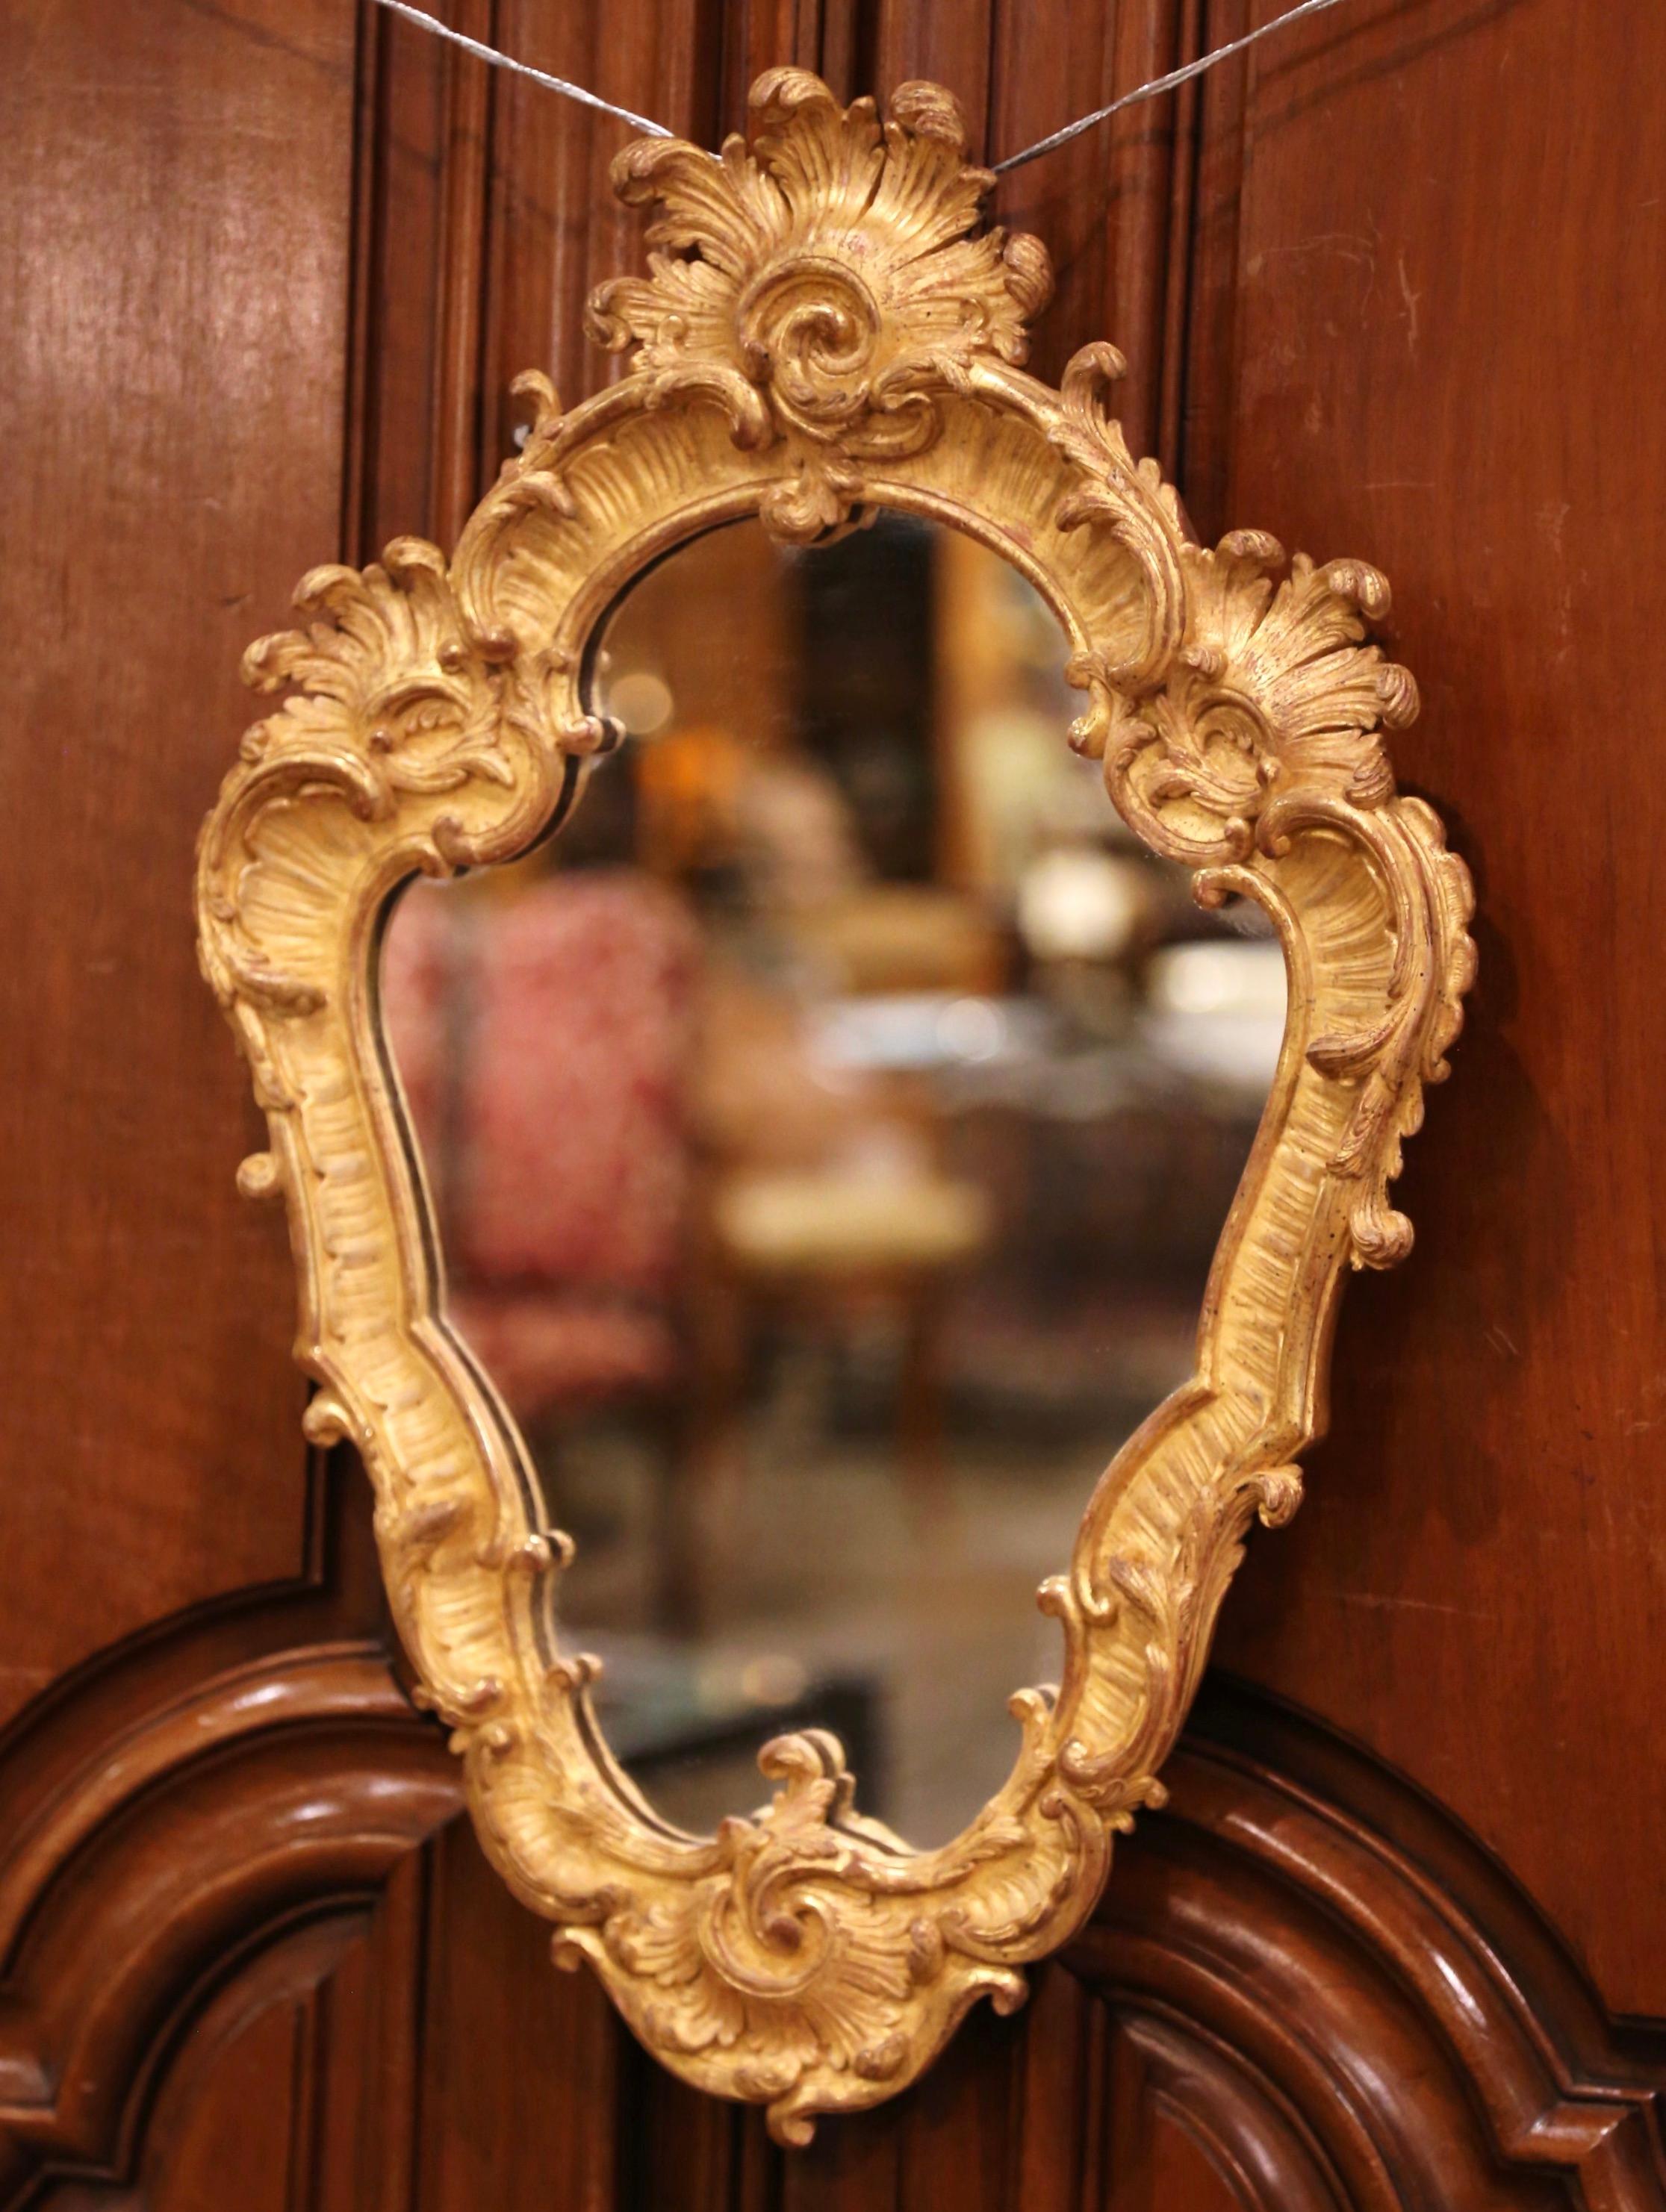 Crafted in France circa 1880, the elegant antique gilt mirror in the Louis XV style, features gracious lines with intricate carving, including scrolled and foliage decor, and embellished with a carved shell cartouche at the bottom. The petite Rococo